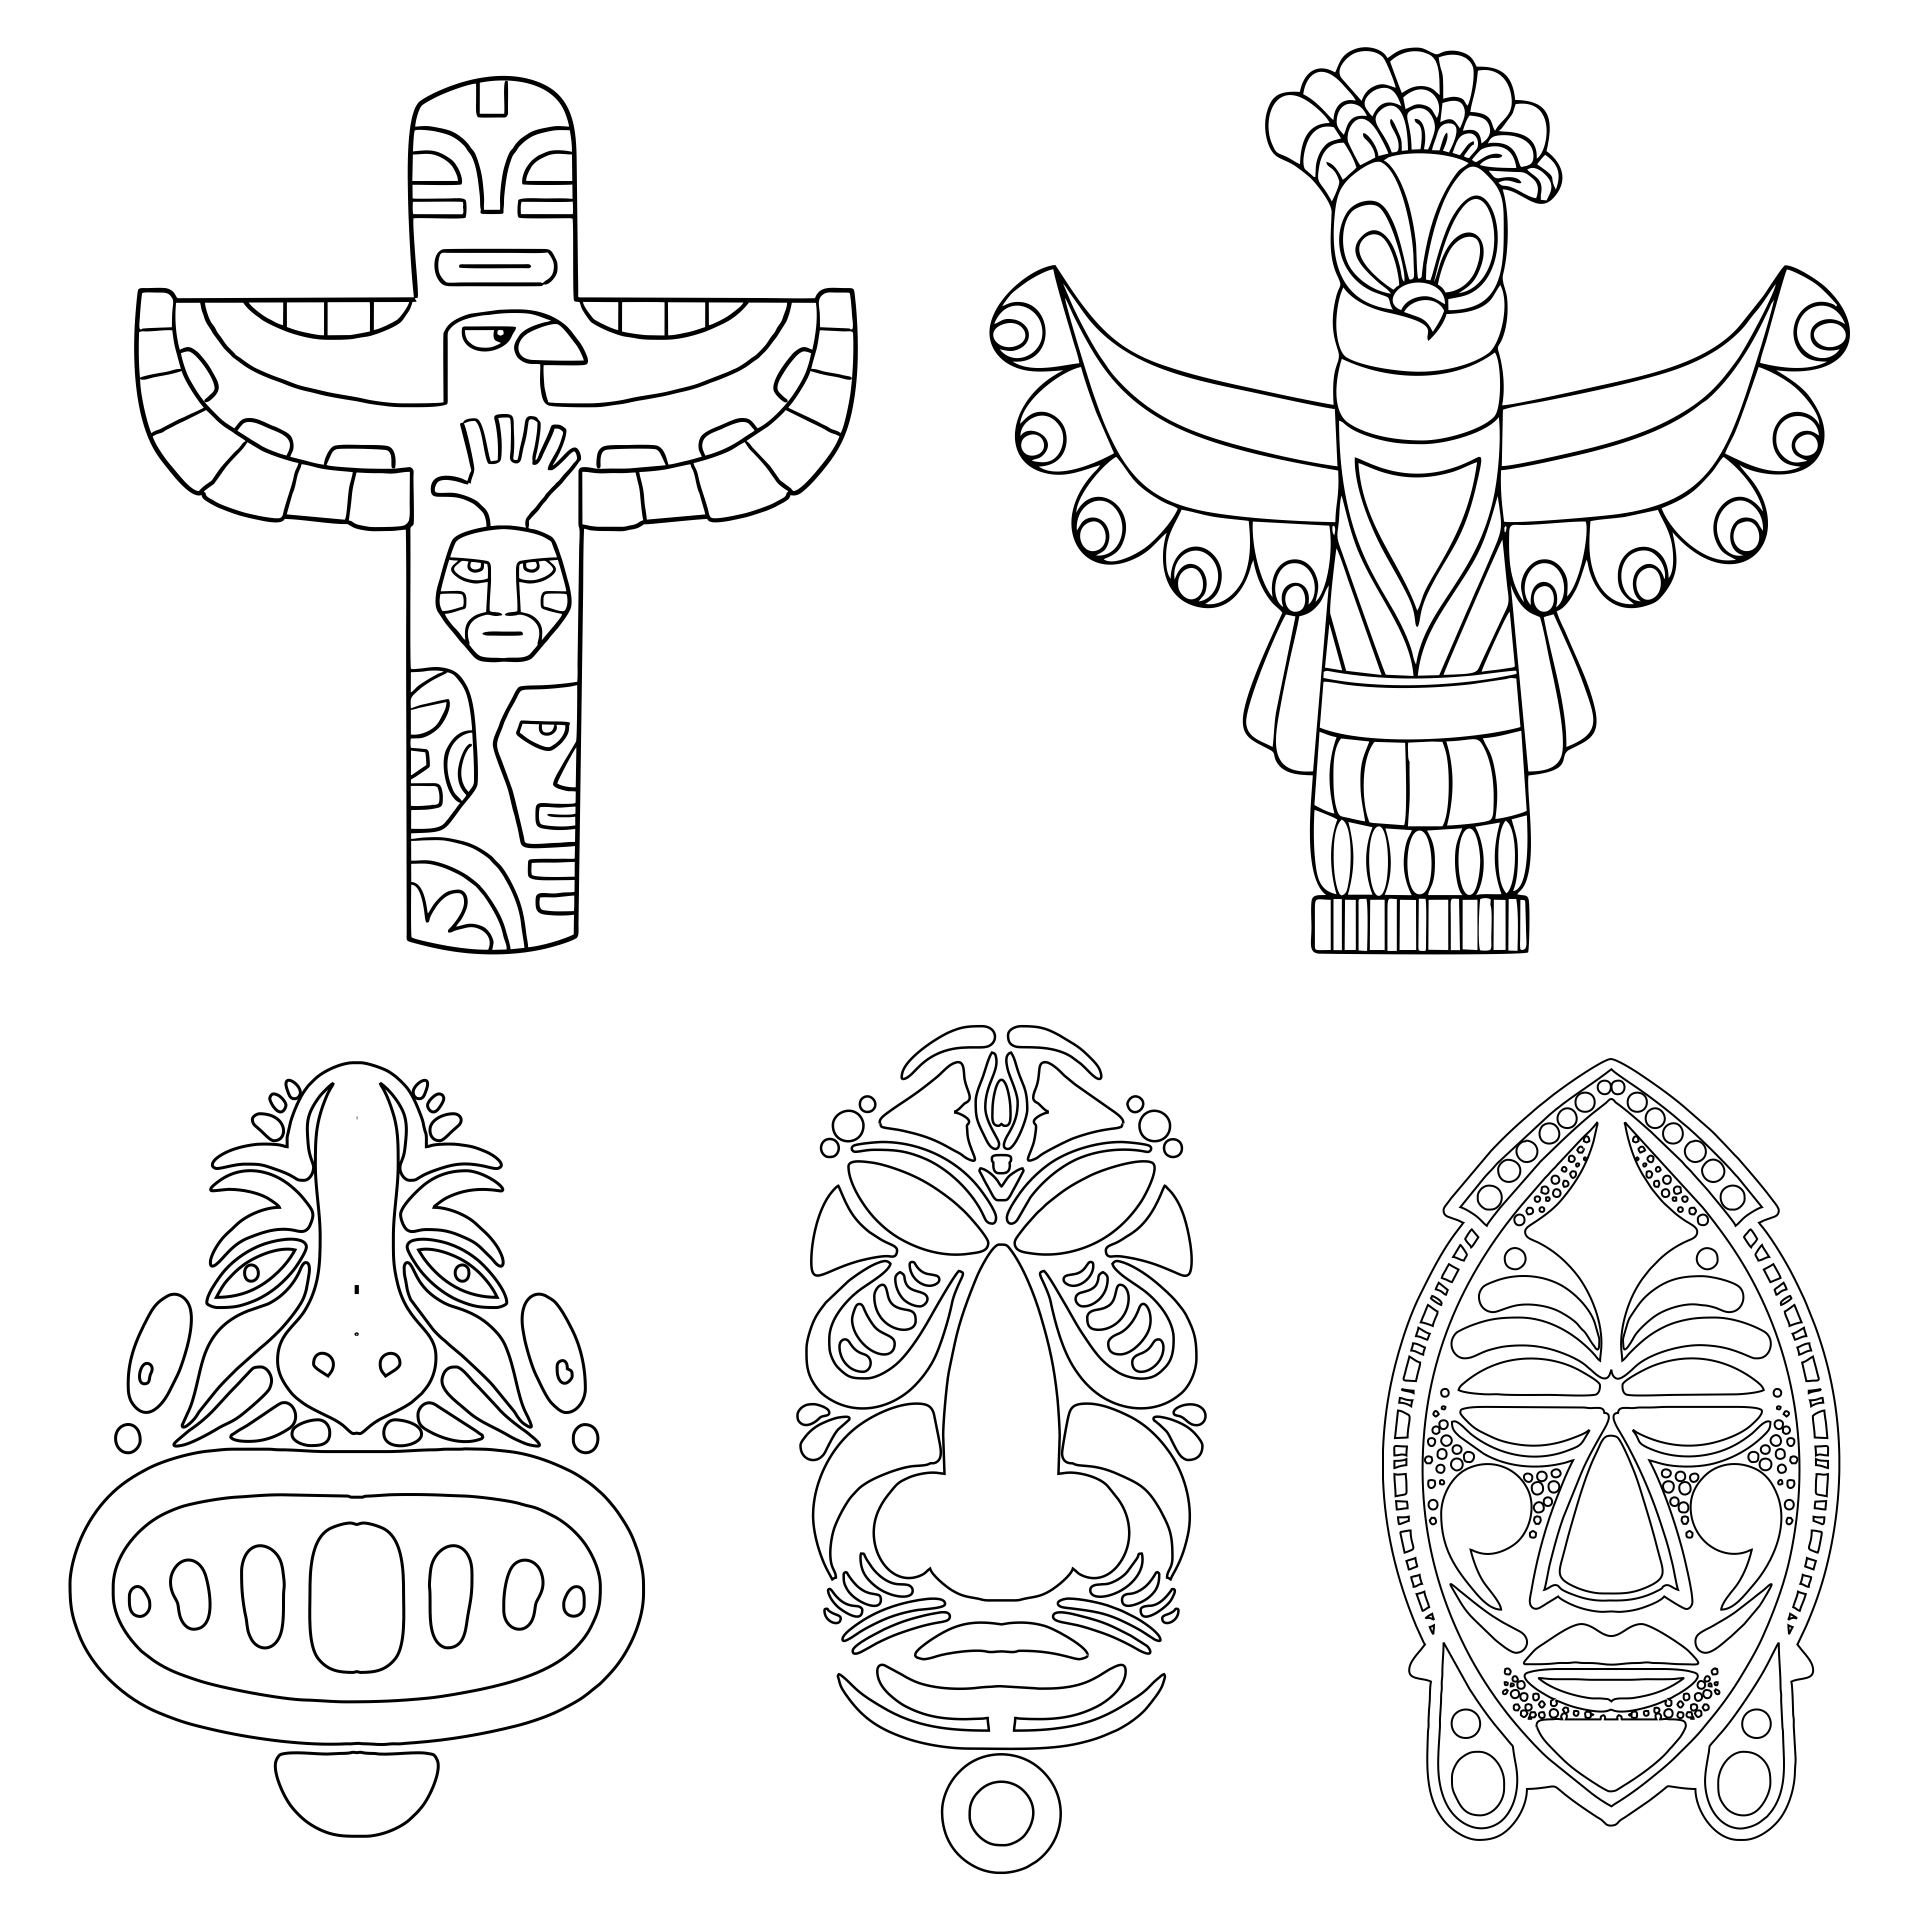 7 Best Images of Printable Totem Pole Templates - Totem Poles Printable ...